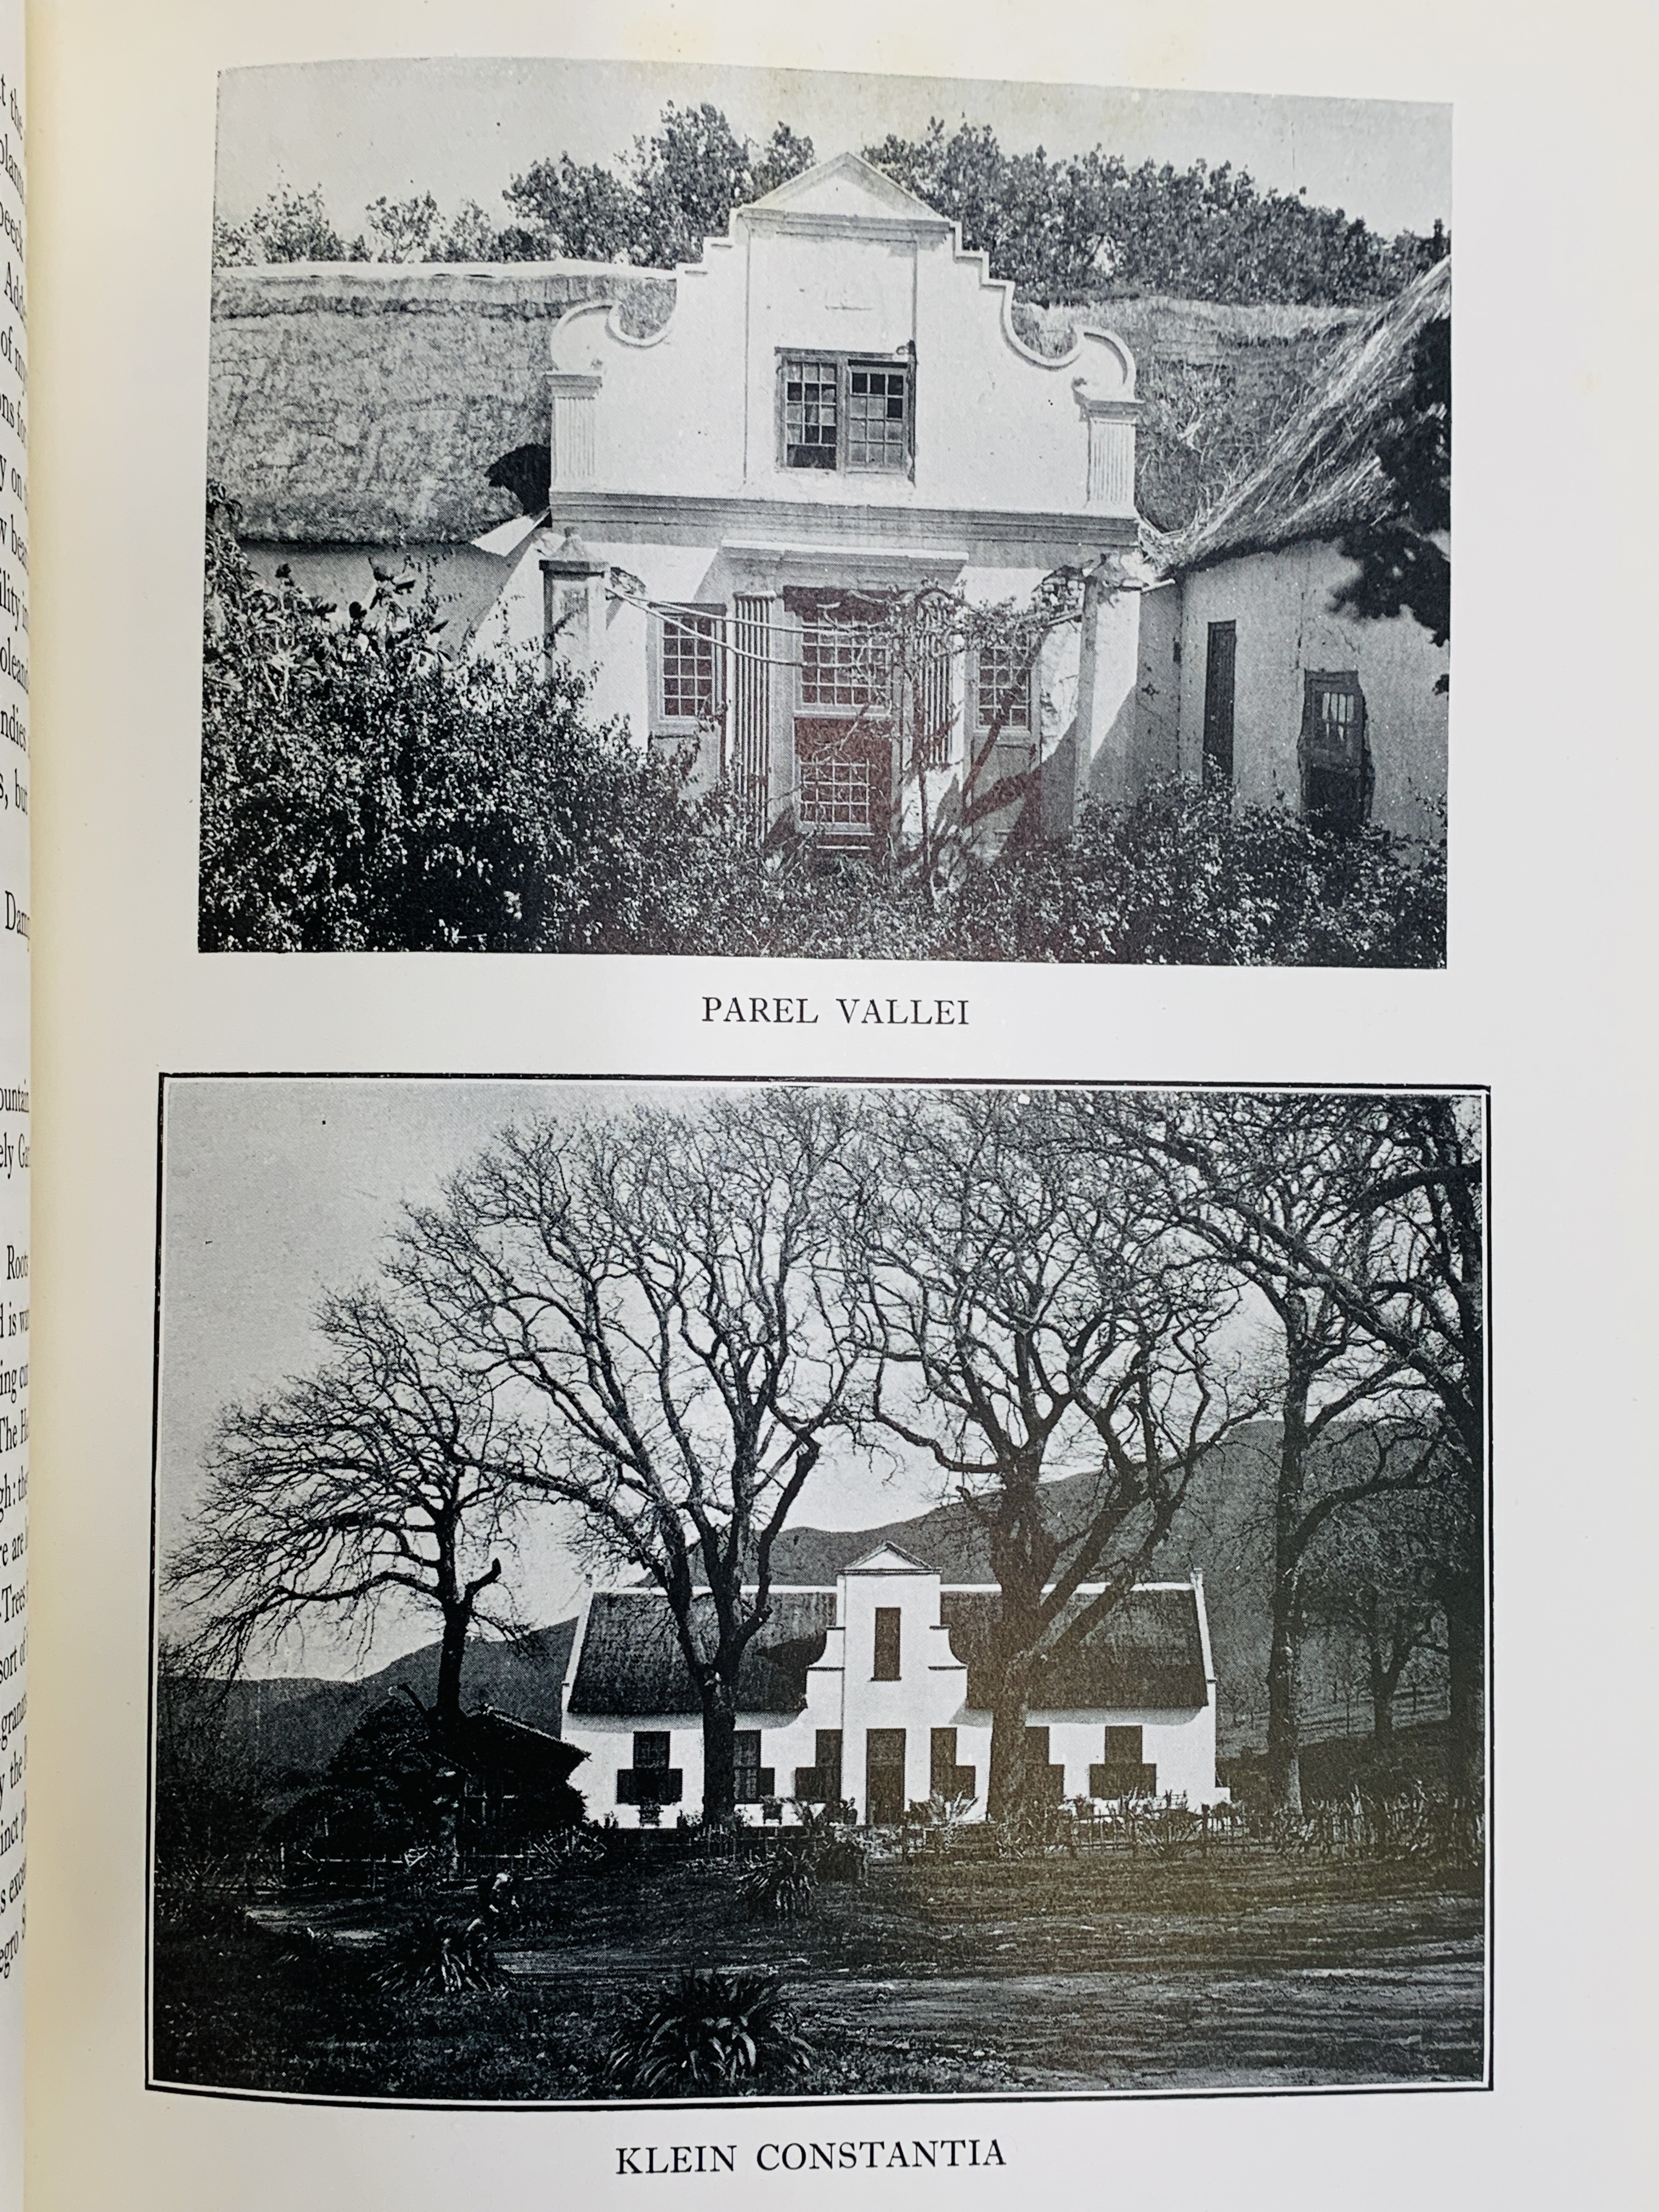 Historic Farms of South Africa by D Fairbridge 1931 - Image 6 of 7